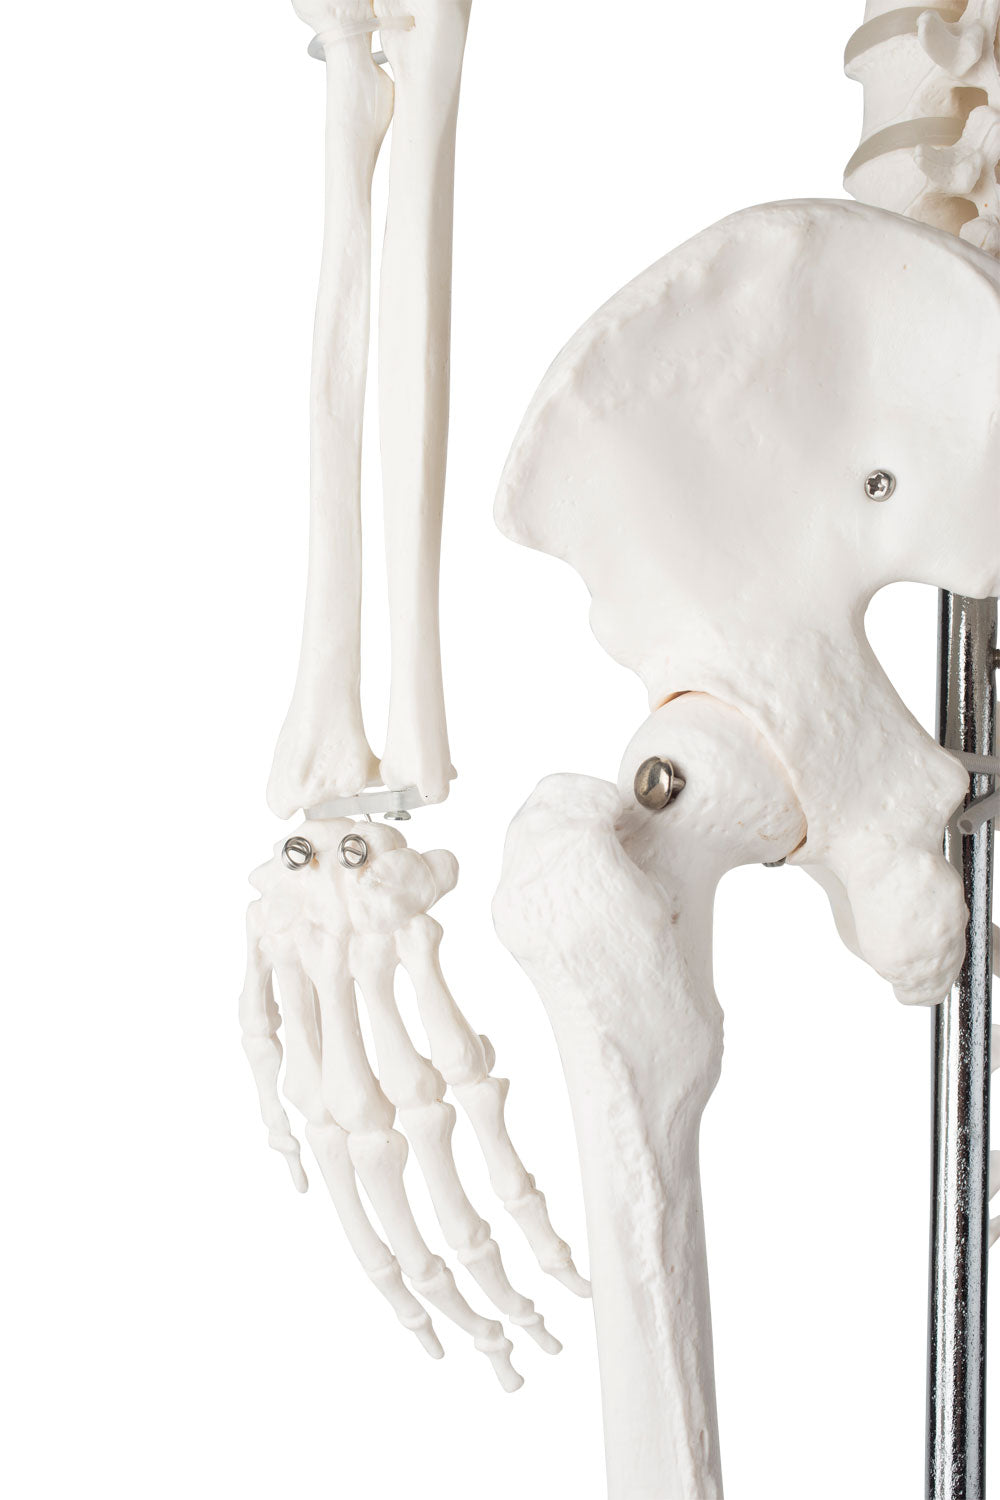 Skeleton model of 85 cm with a high degree of detail